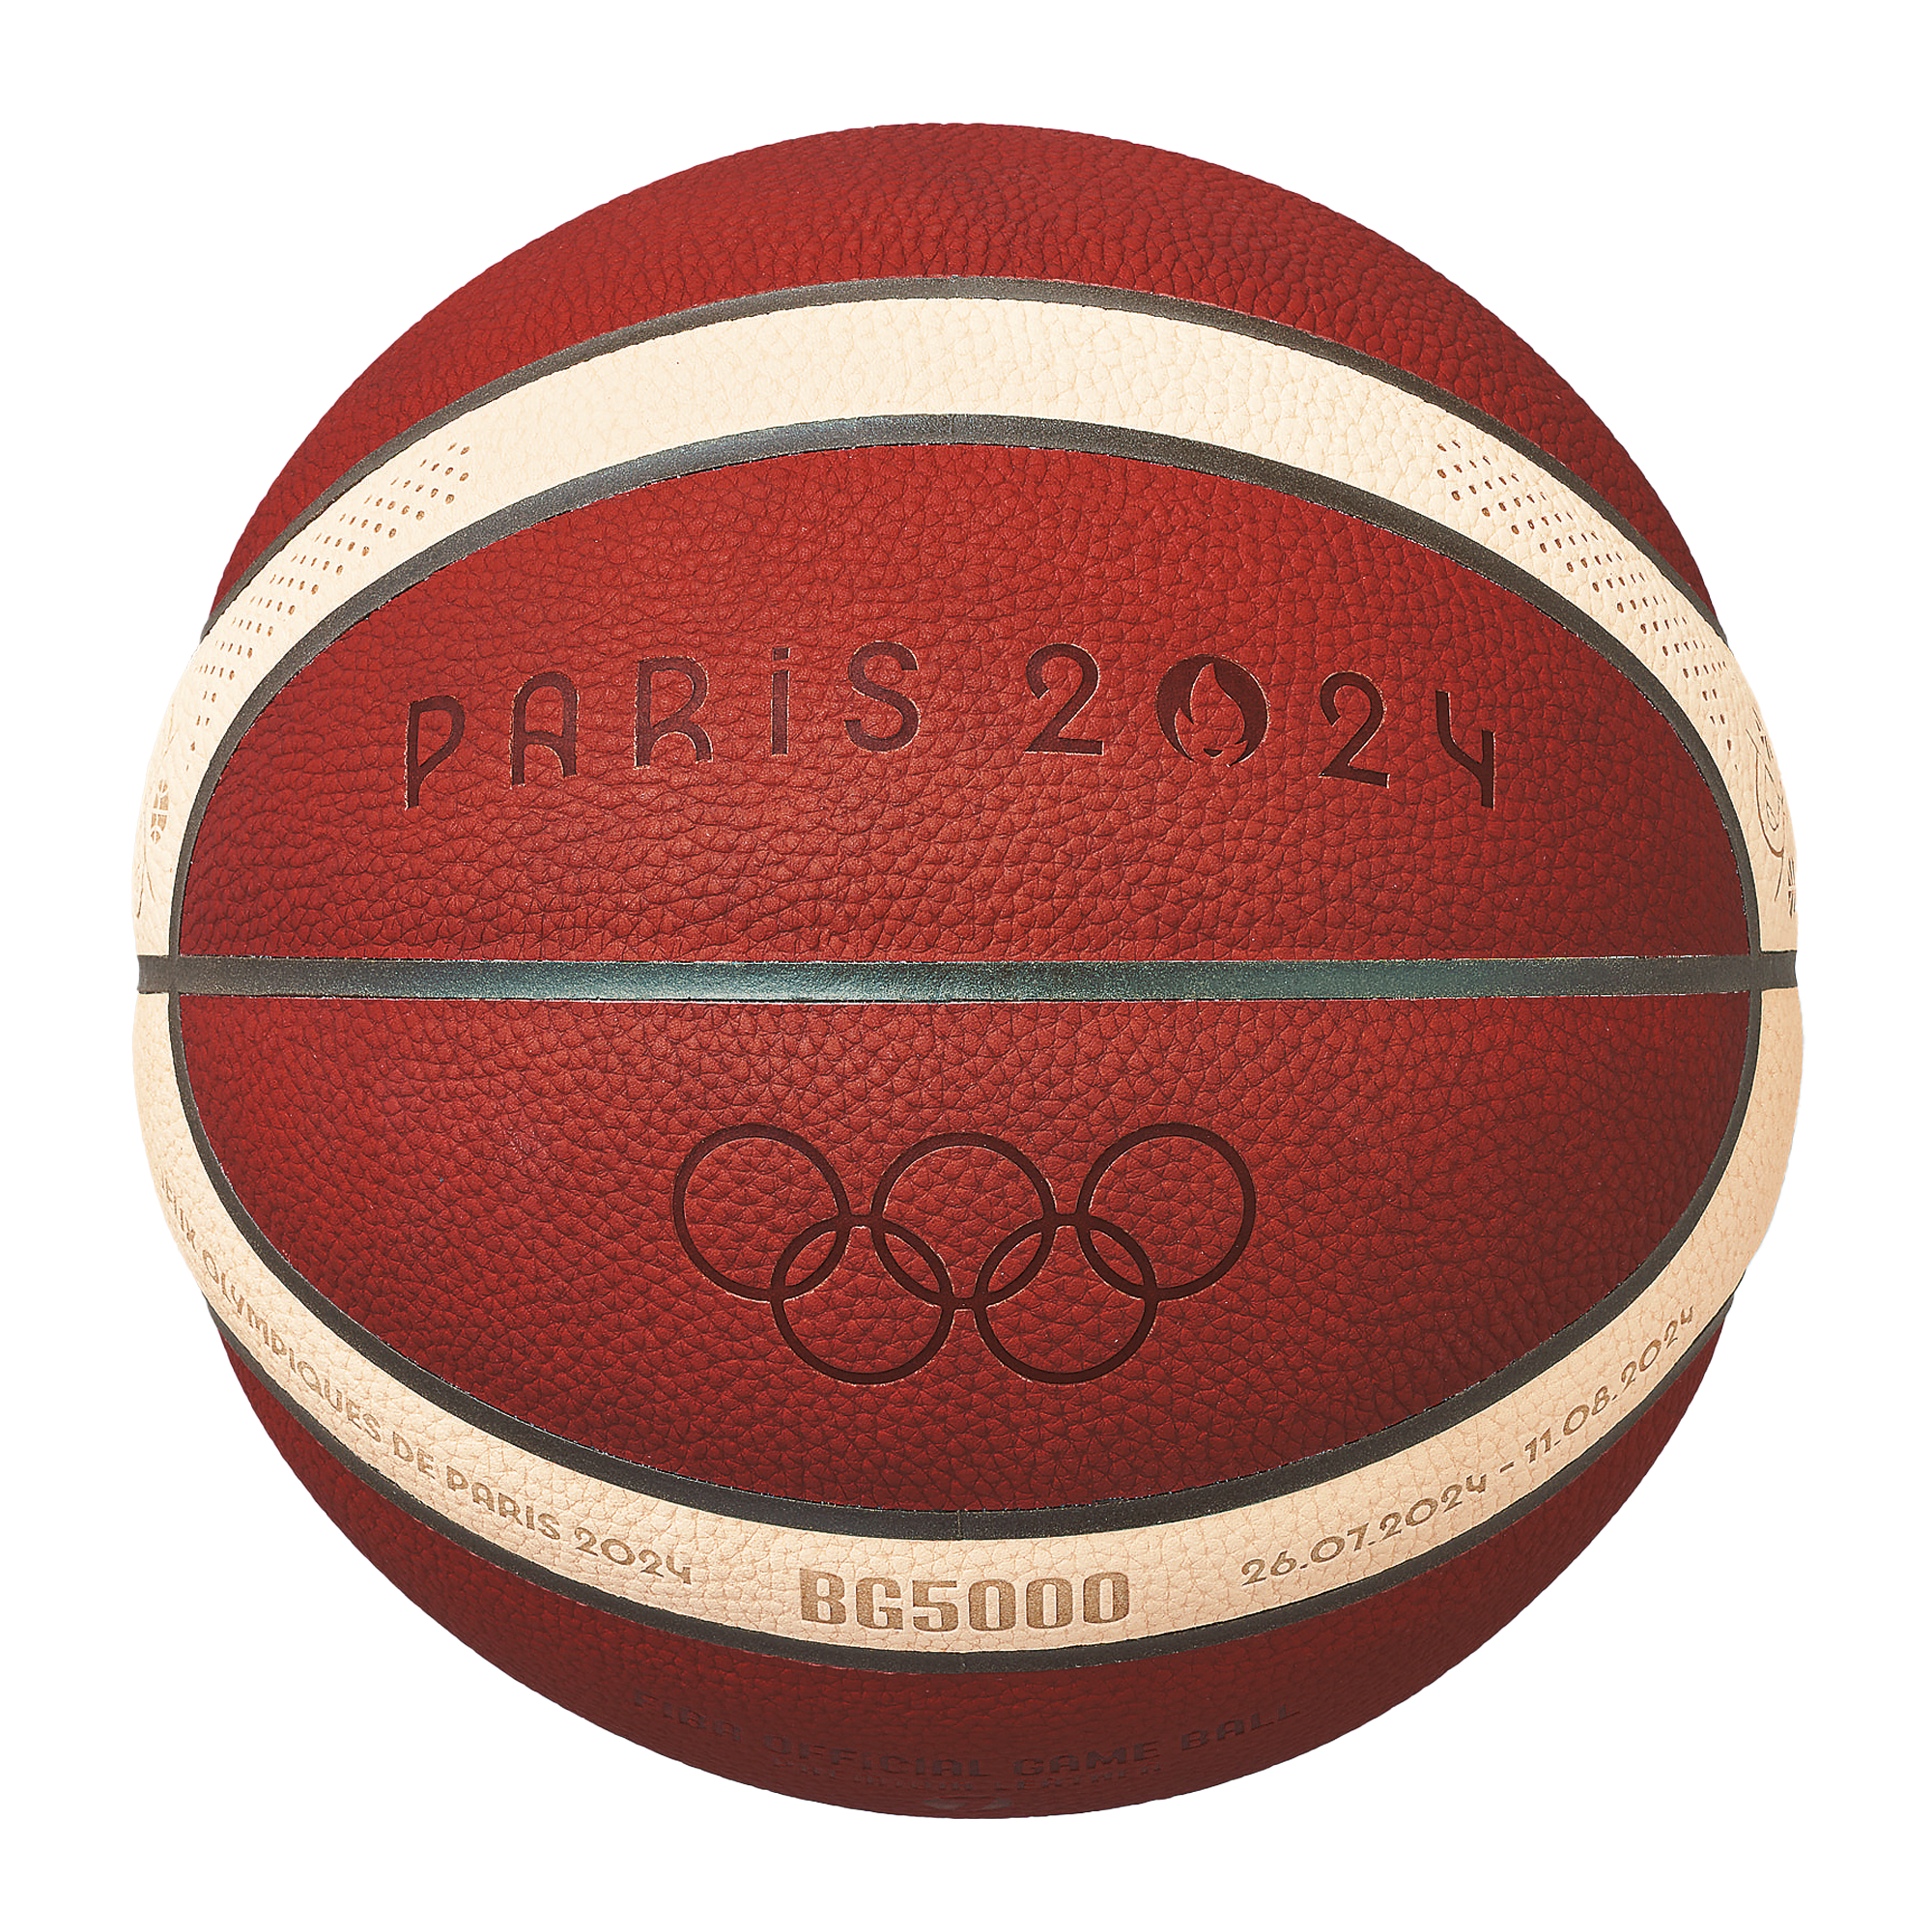 molten-basketball-B7G5000-S4F-S1.png